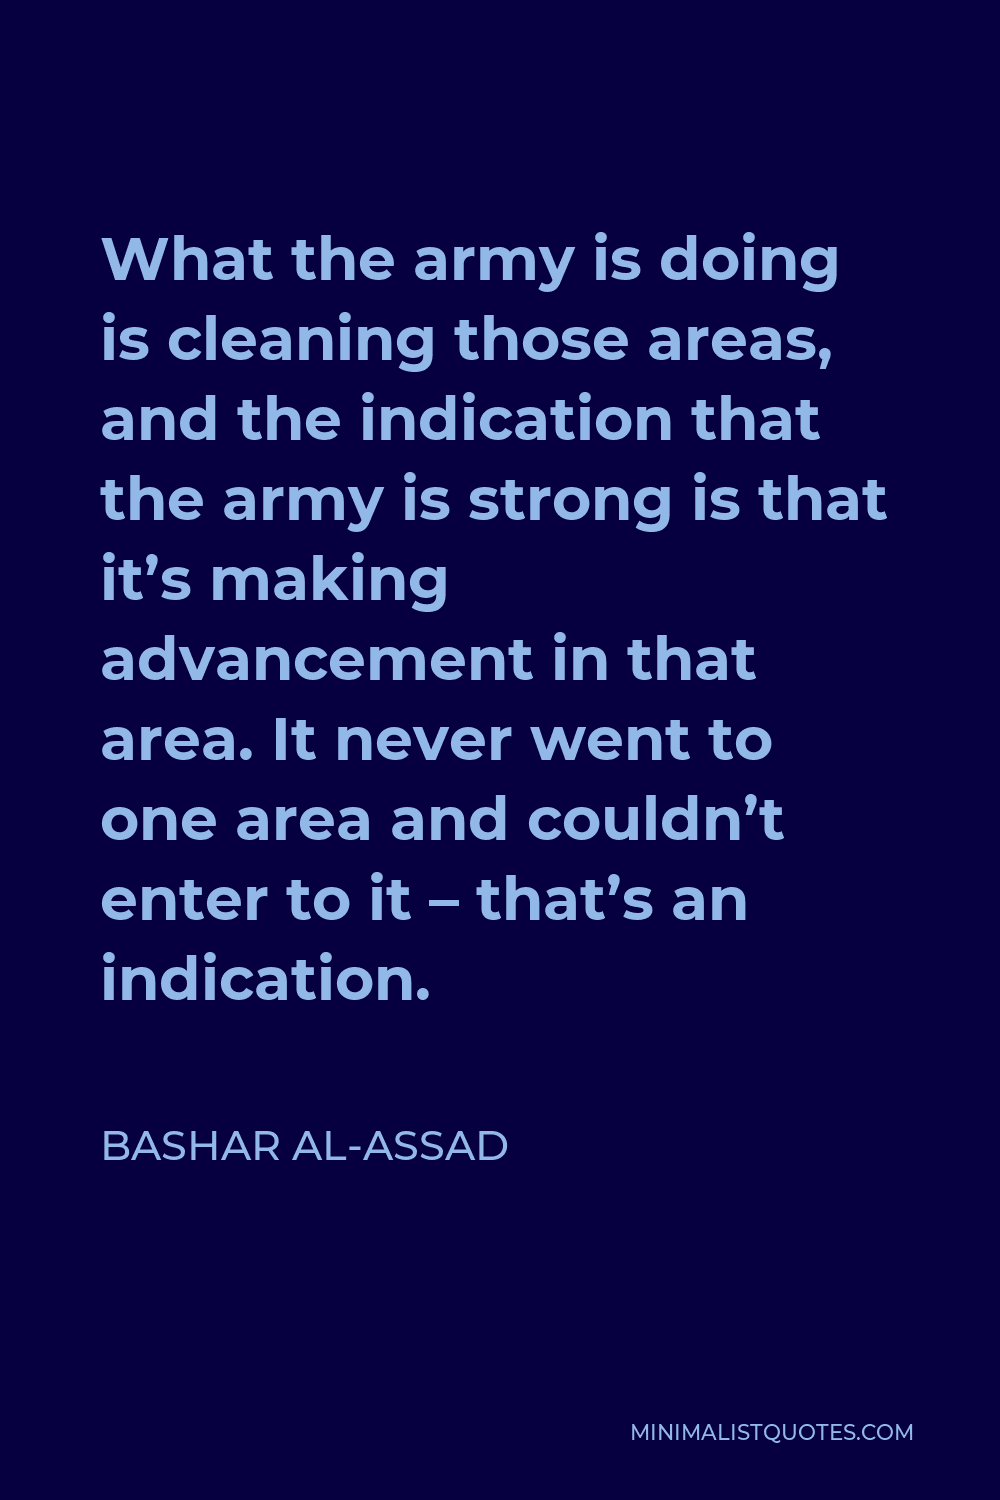 Bashar al-Assad Quote - What the army is doing is cleaning those areas, and the indication that the army is strong is that it’s making advancement in that area. It never went to one area and couldn’t enter to it – that’s an indication.